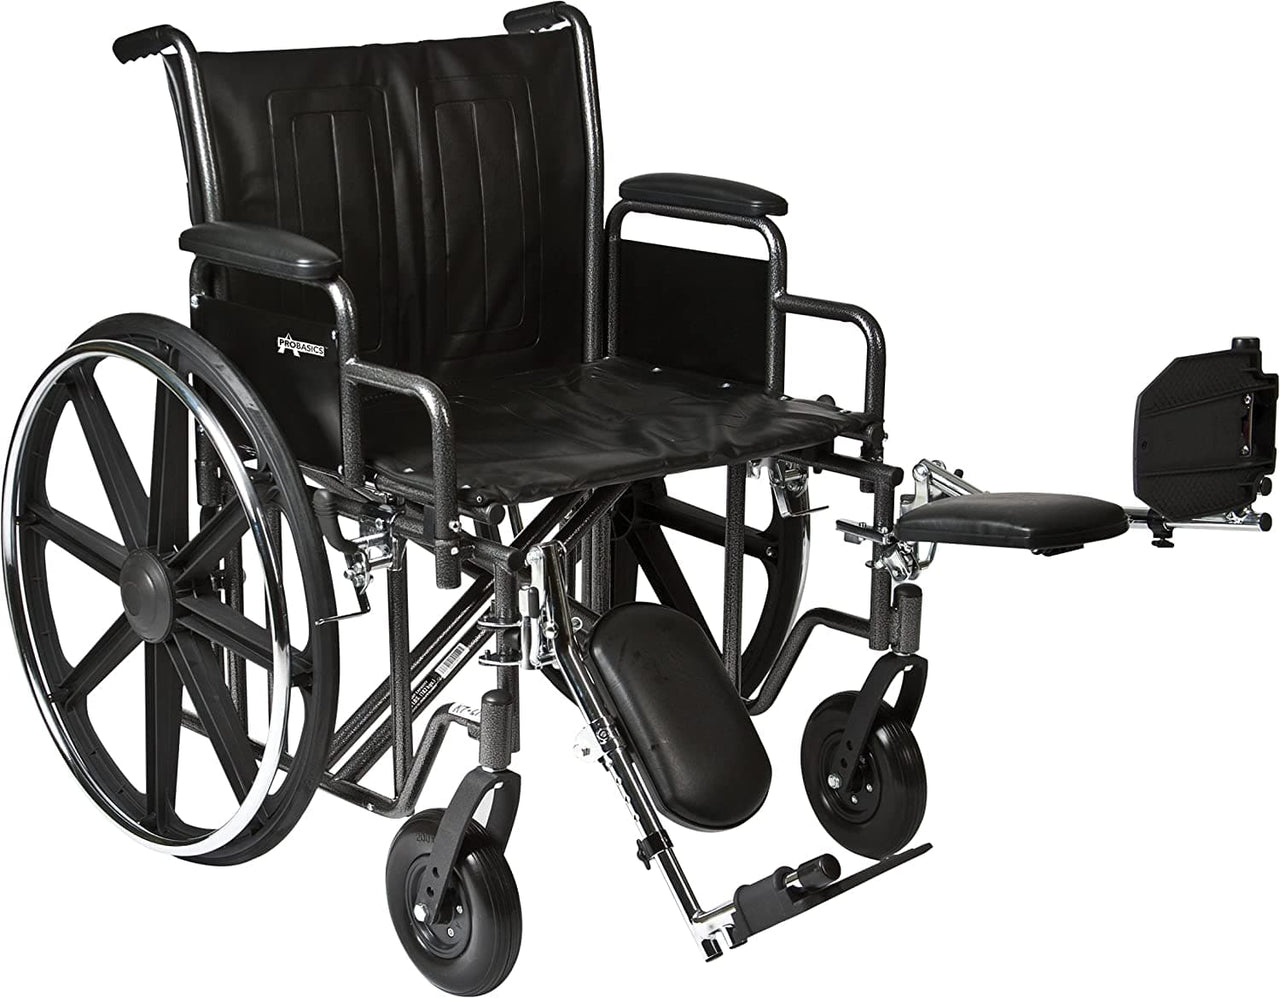 ProBasics K7 Heavy-Duty Wheelchair - Vinyl Upholstered Seat, Removable Desk-Length Arms, and Elevating Legrests - Senior.com Wheelchairs